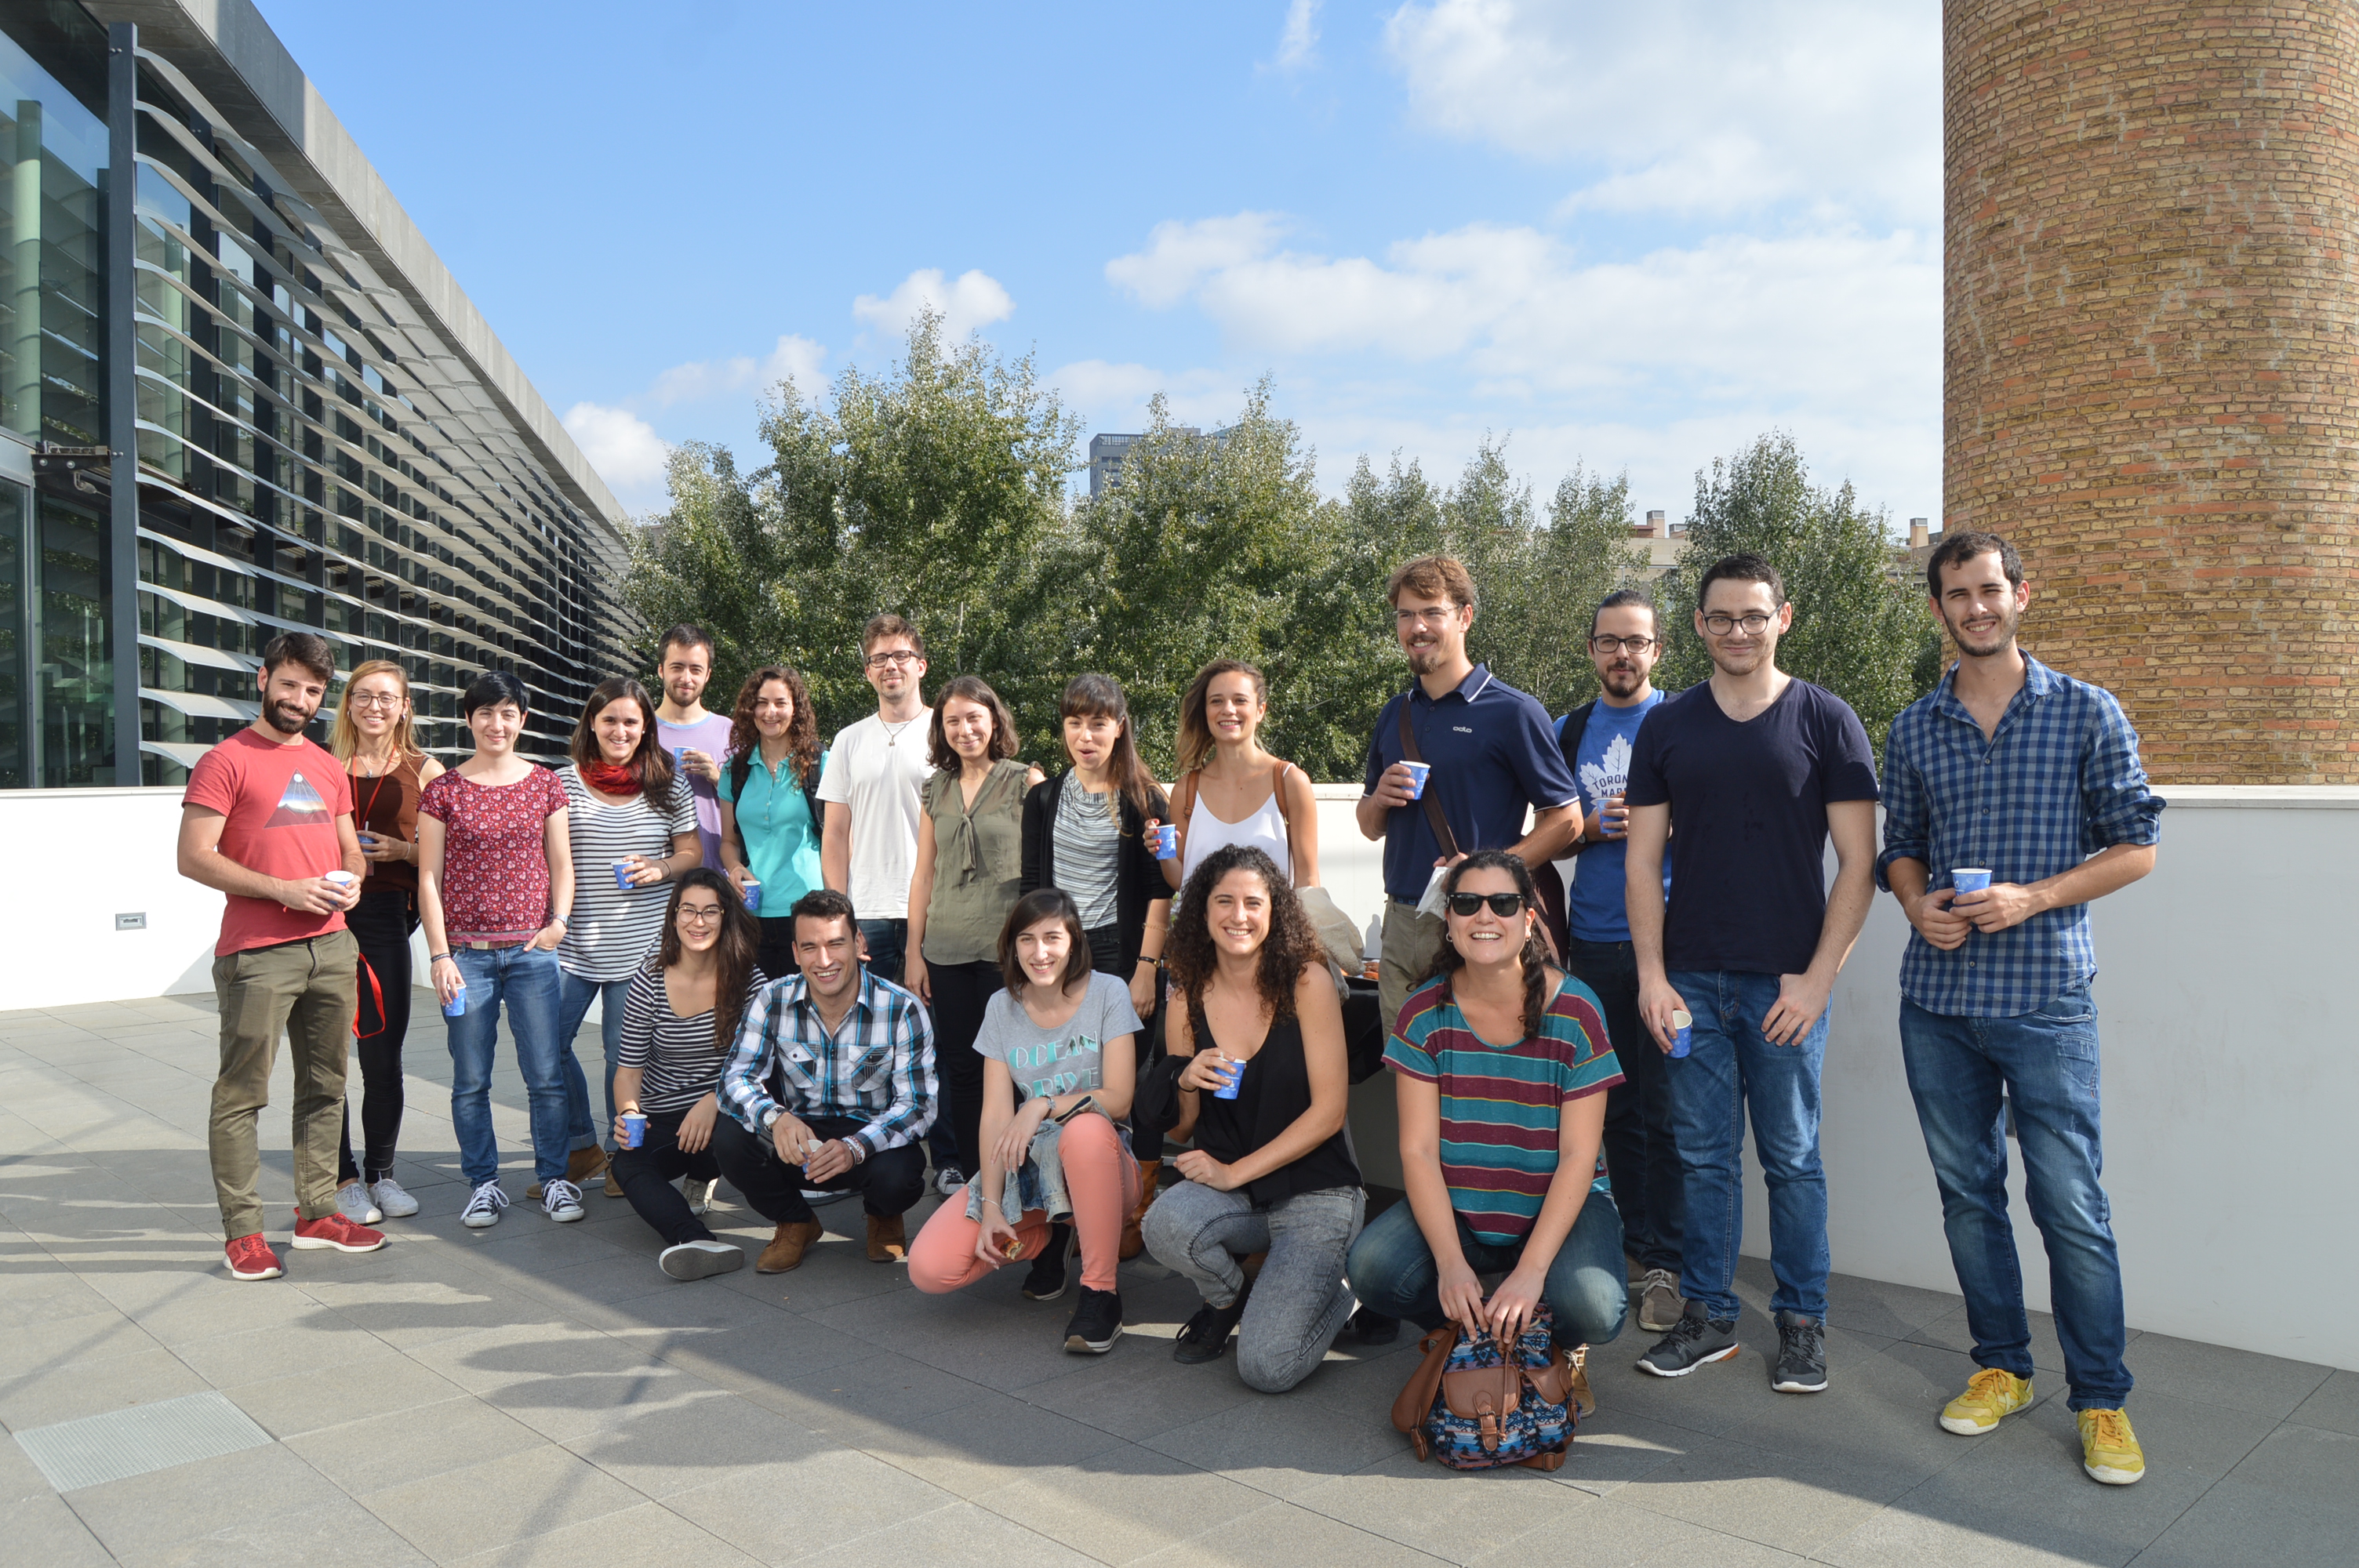 Our Department welcomes the new ICT PhD students of this academic year 2017/18